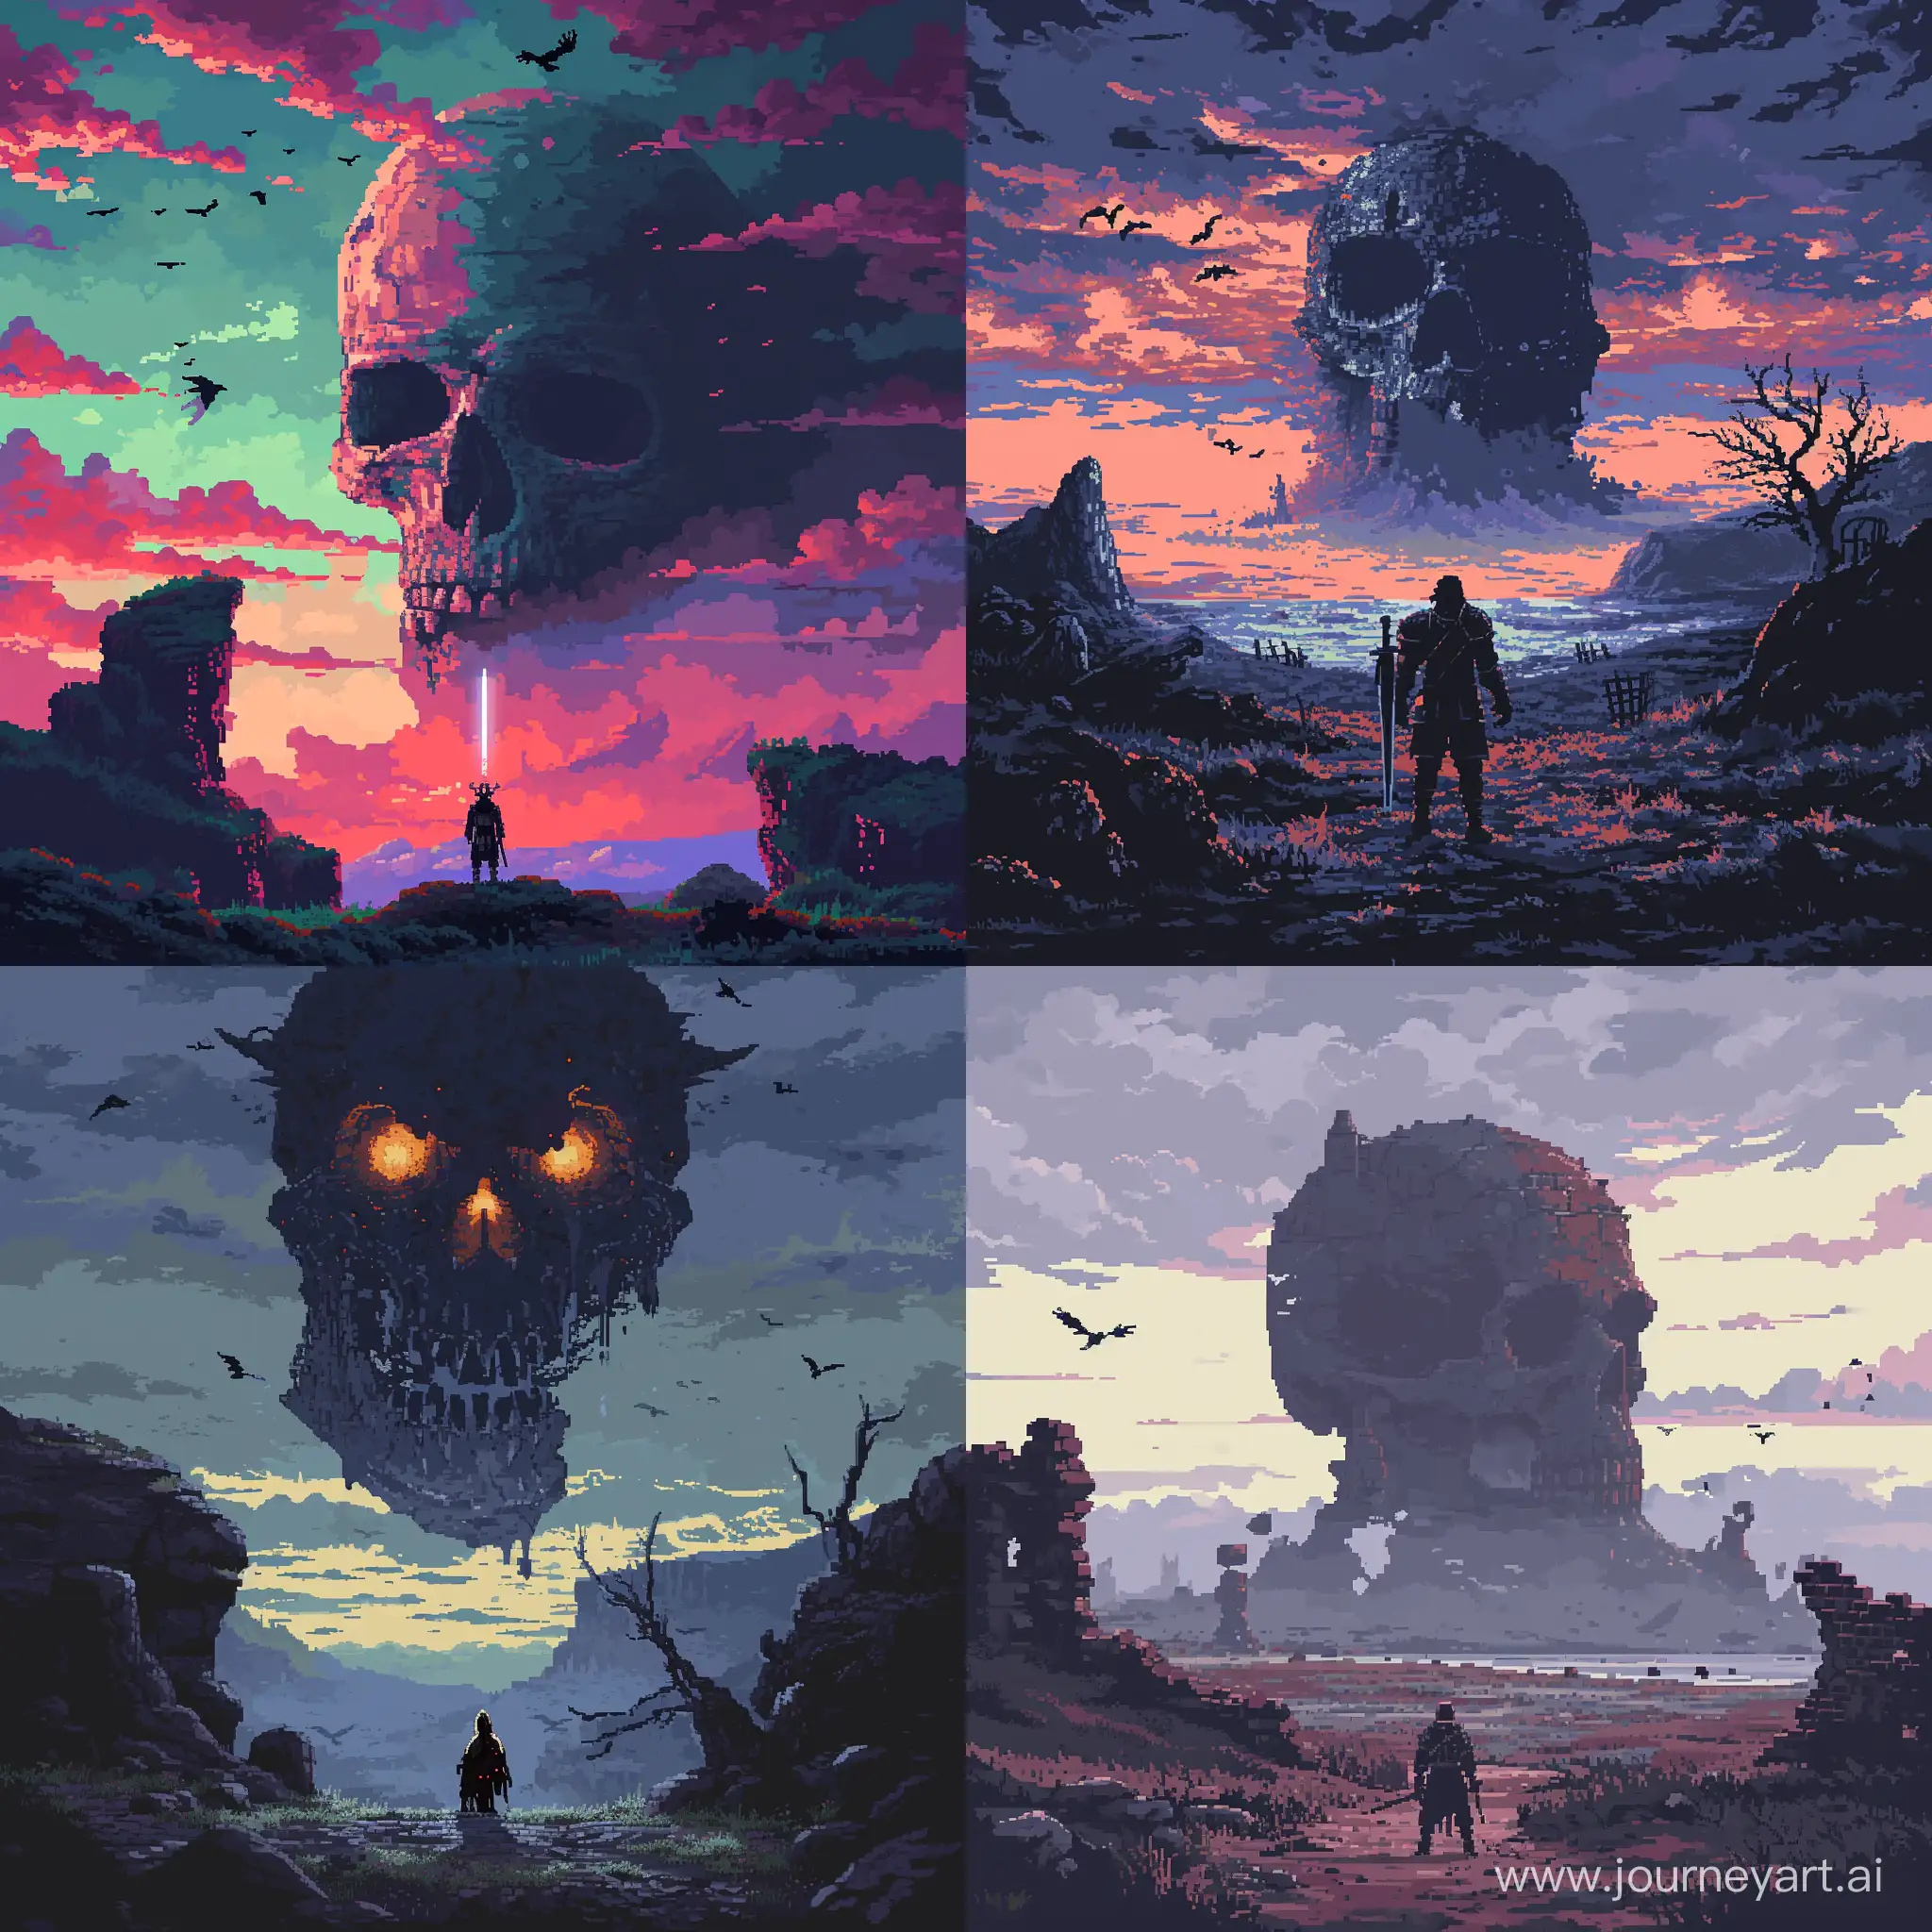 32 bit pixel art, ::1.2. A warrior stands in a desolate land with a giant skull looming above them. The warrior is equipped with a sword and shield, there is a skull with glowing eyes in the background. The scene is set at dusk, there are crows flying around. --v 6